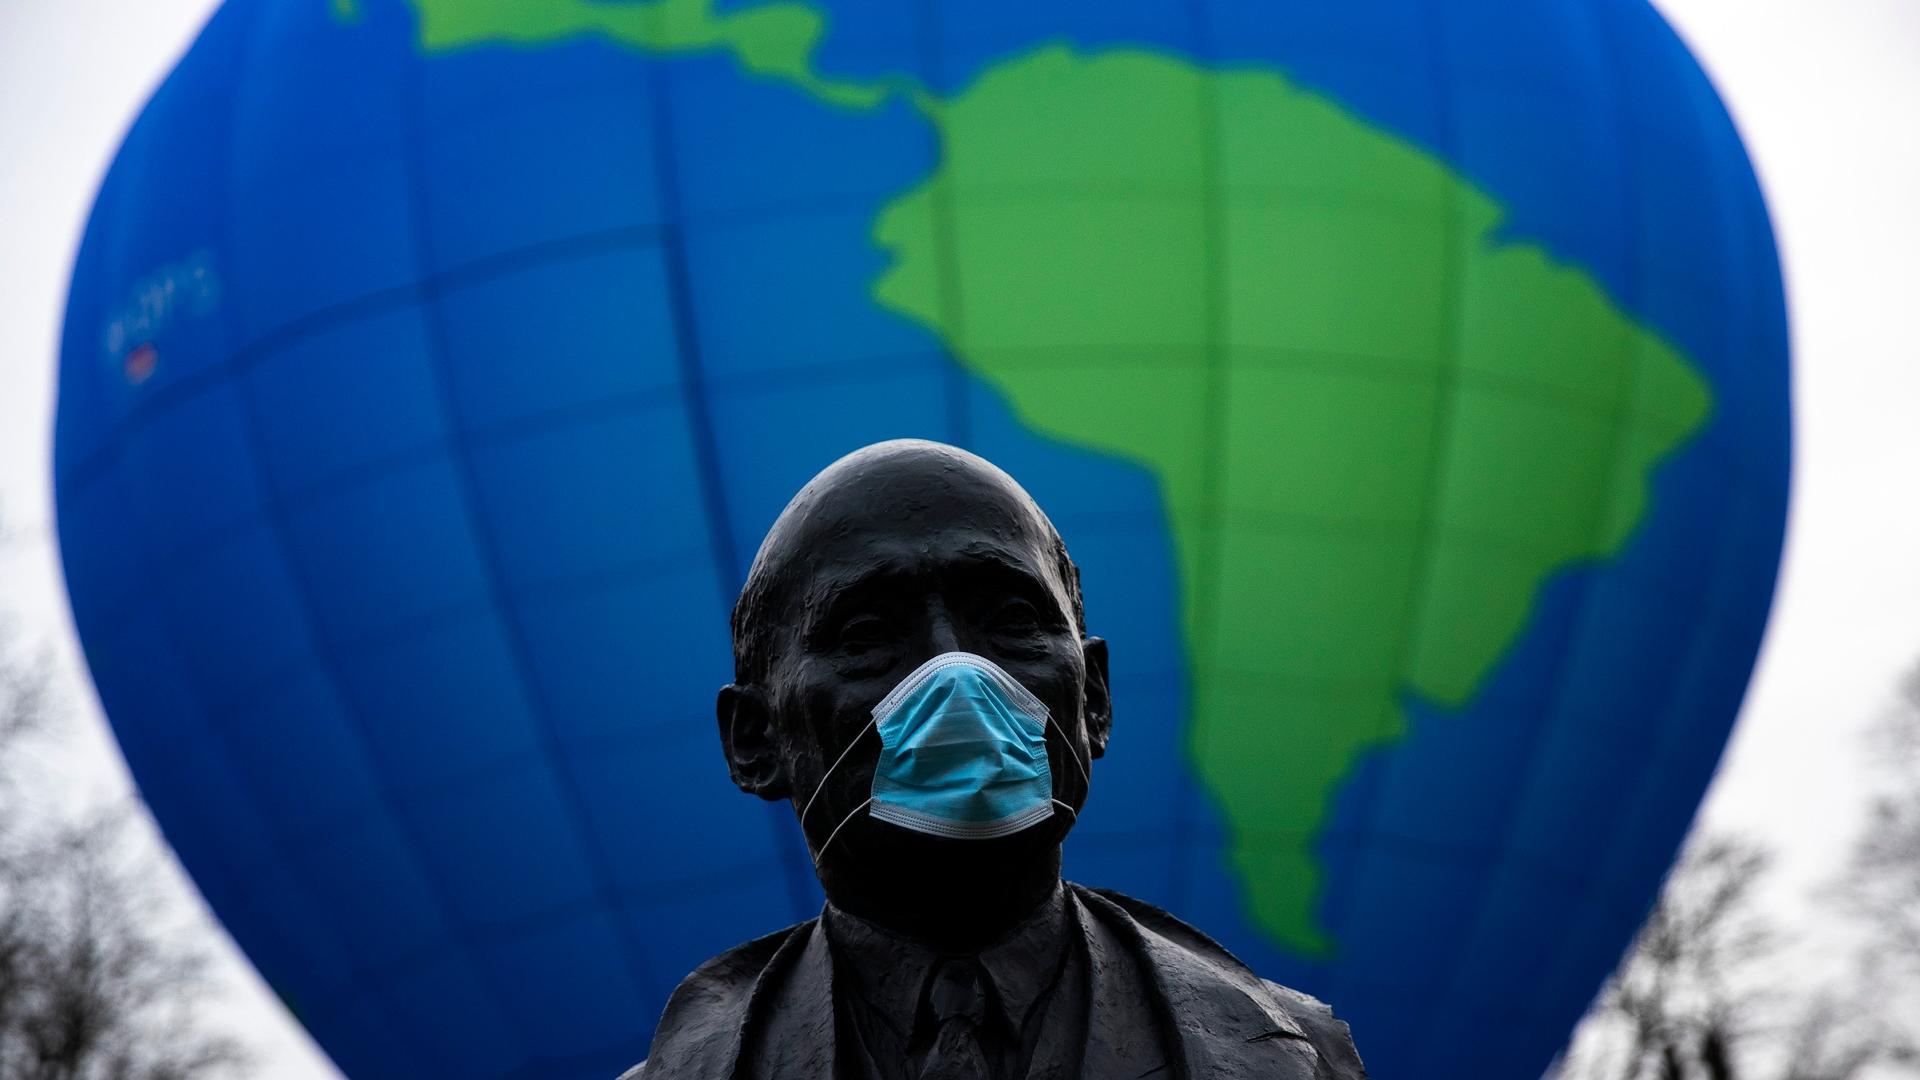 The bust of French statesman Robert Schuman, one of the founders of the European Union, is seen while environmental activists launch a hot air balloon during a demonstration outside of an EU summit in Brussels, Belgium, Dec. 10, 2020.